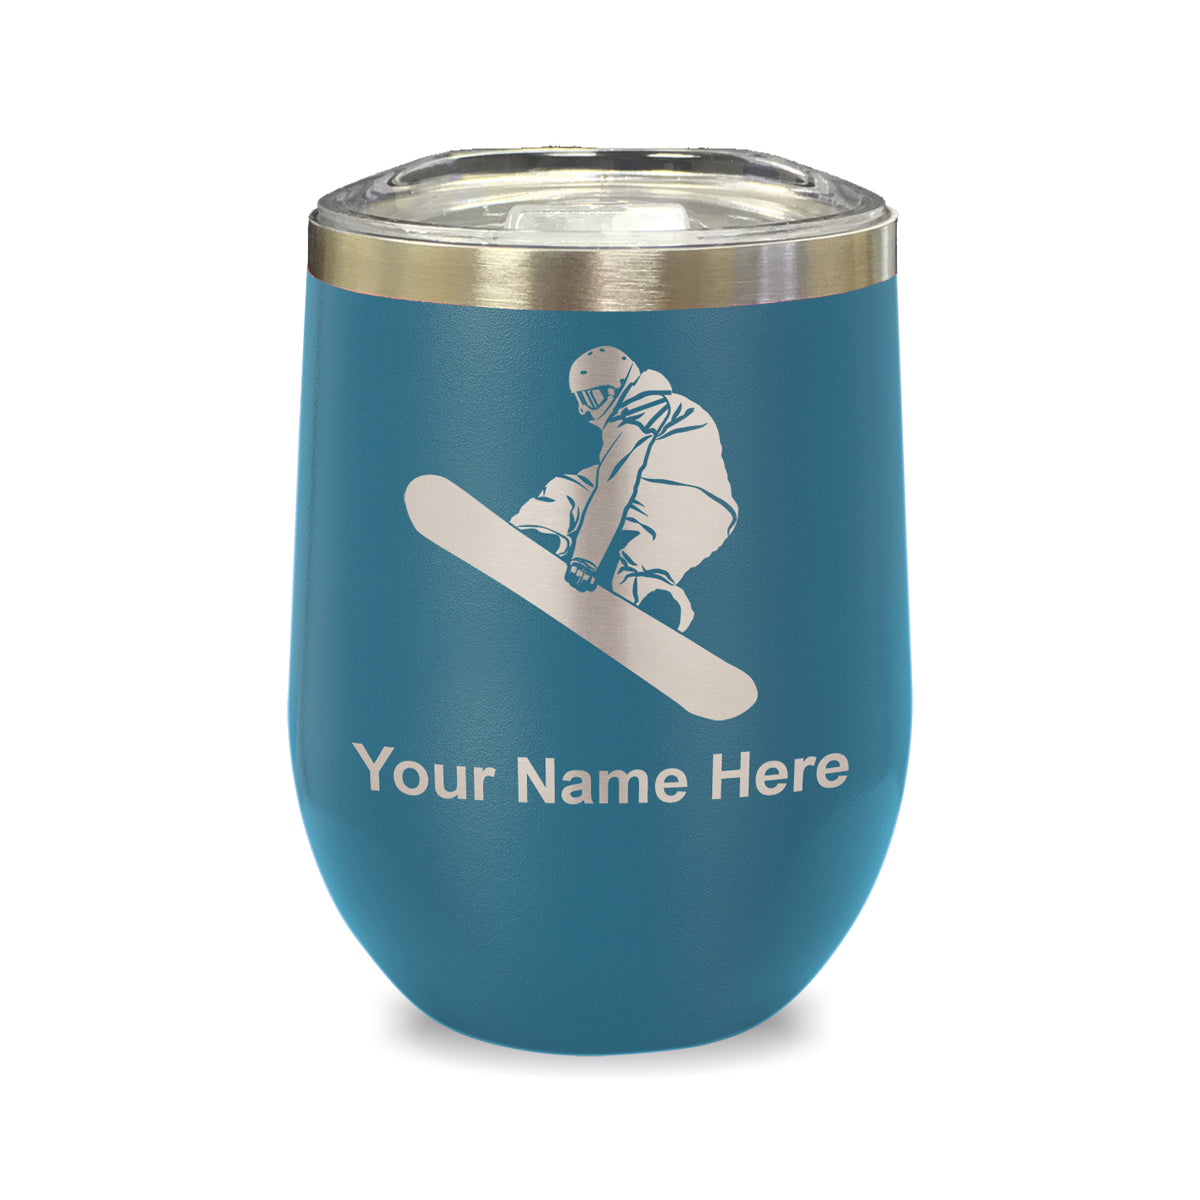 LaserGram Double Wall Stainless Steel Wine Glass, Snowboarder Man, Personalized Engraving Included